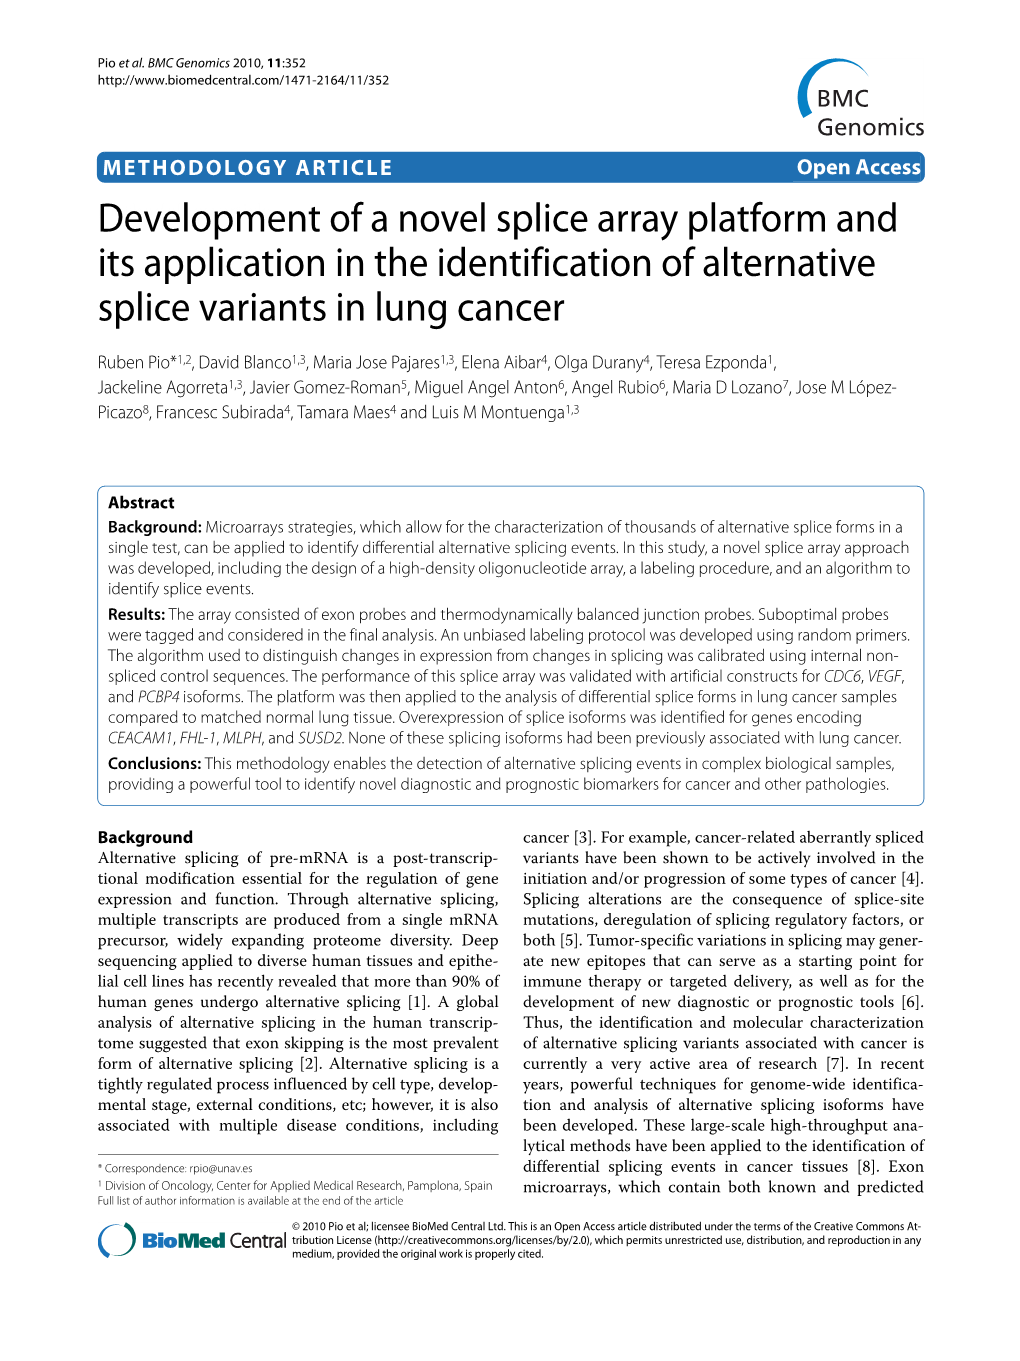 Development of a Novel Splice Array Platform and Its Application in the Identification of Alternative Splice Variants in Lung Cancer BMC Genomics 2010, 11:352